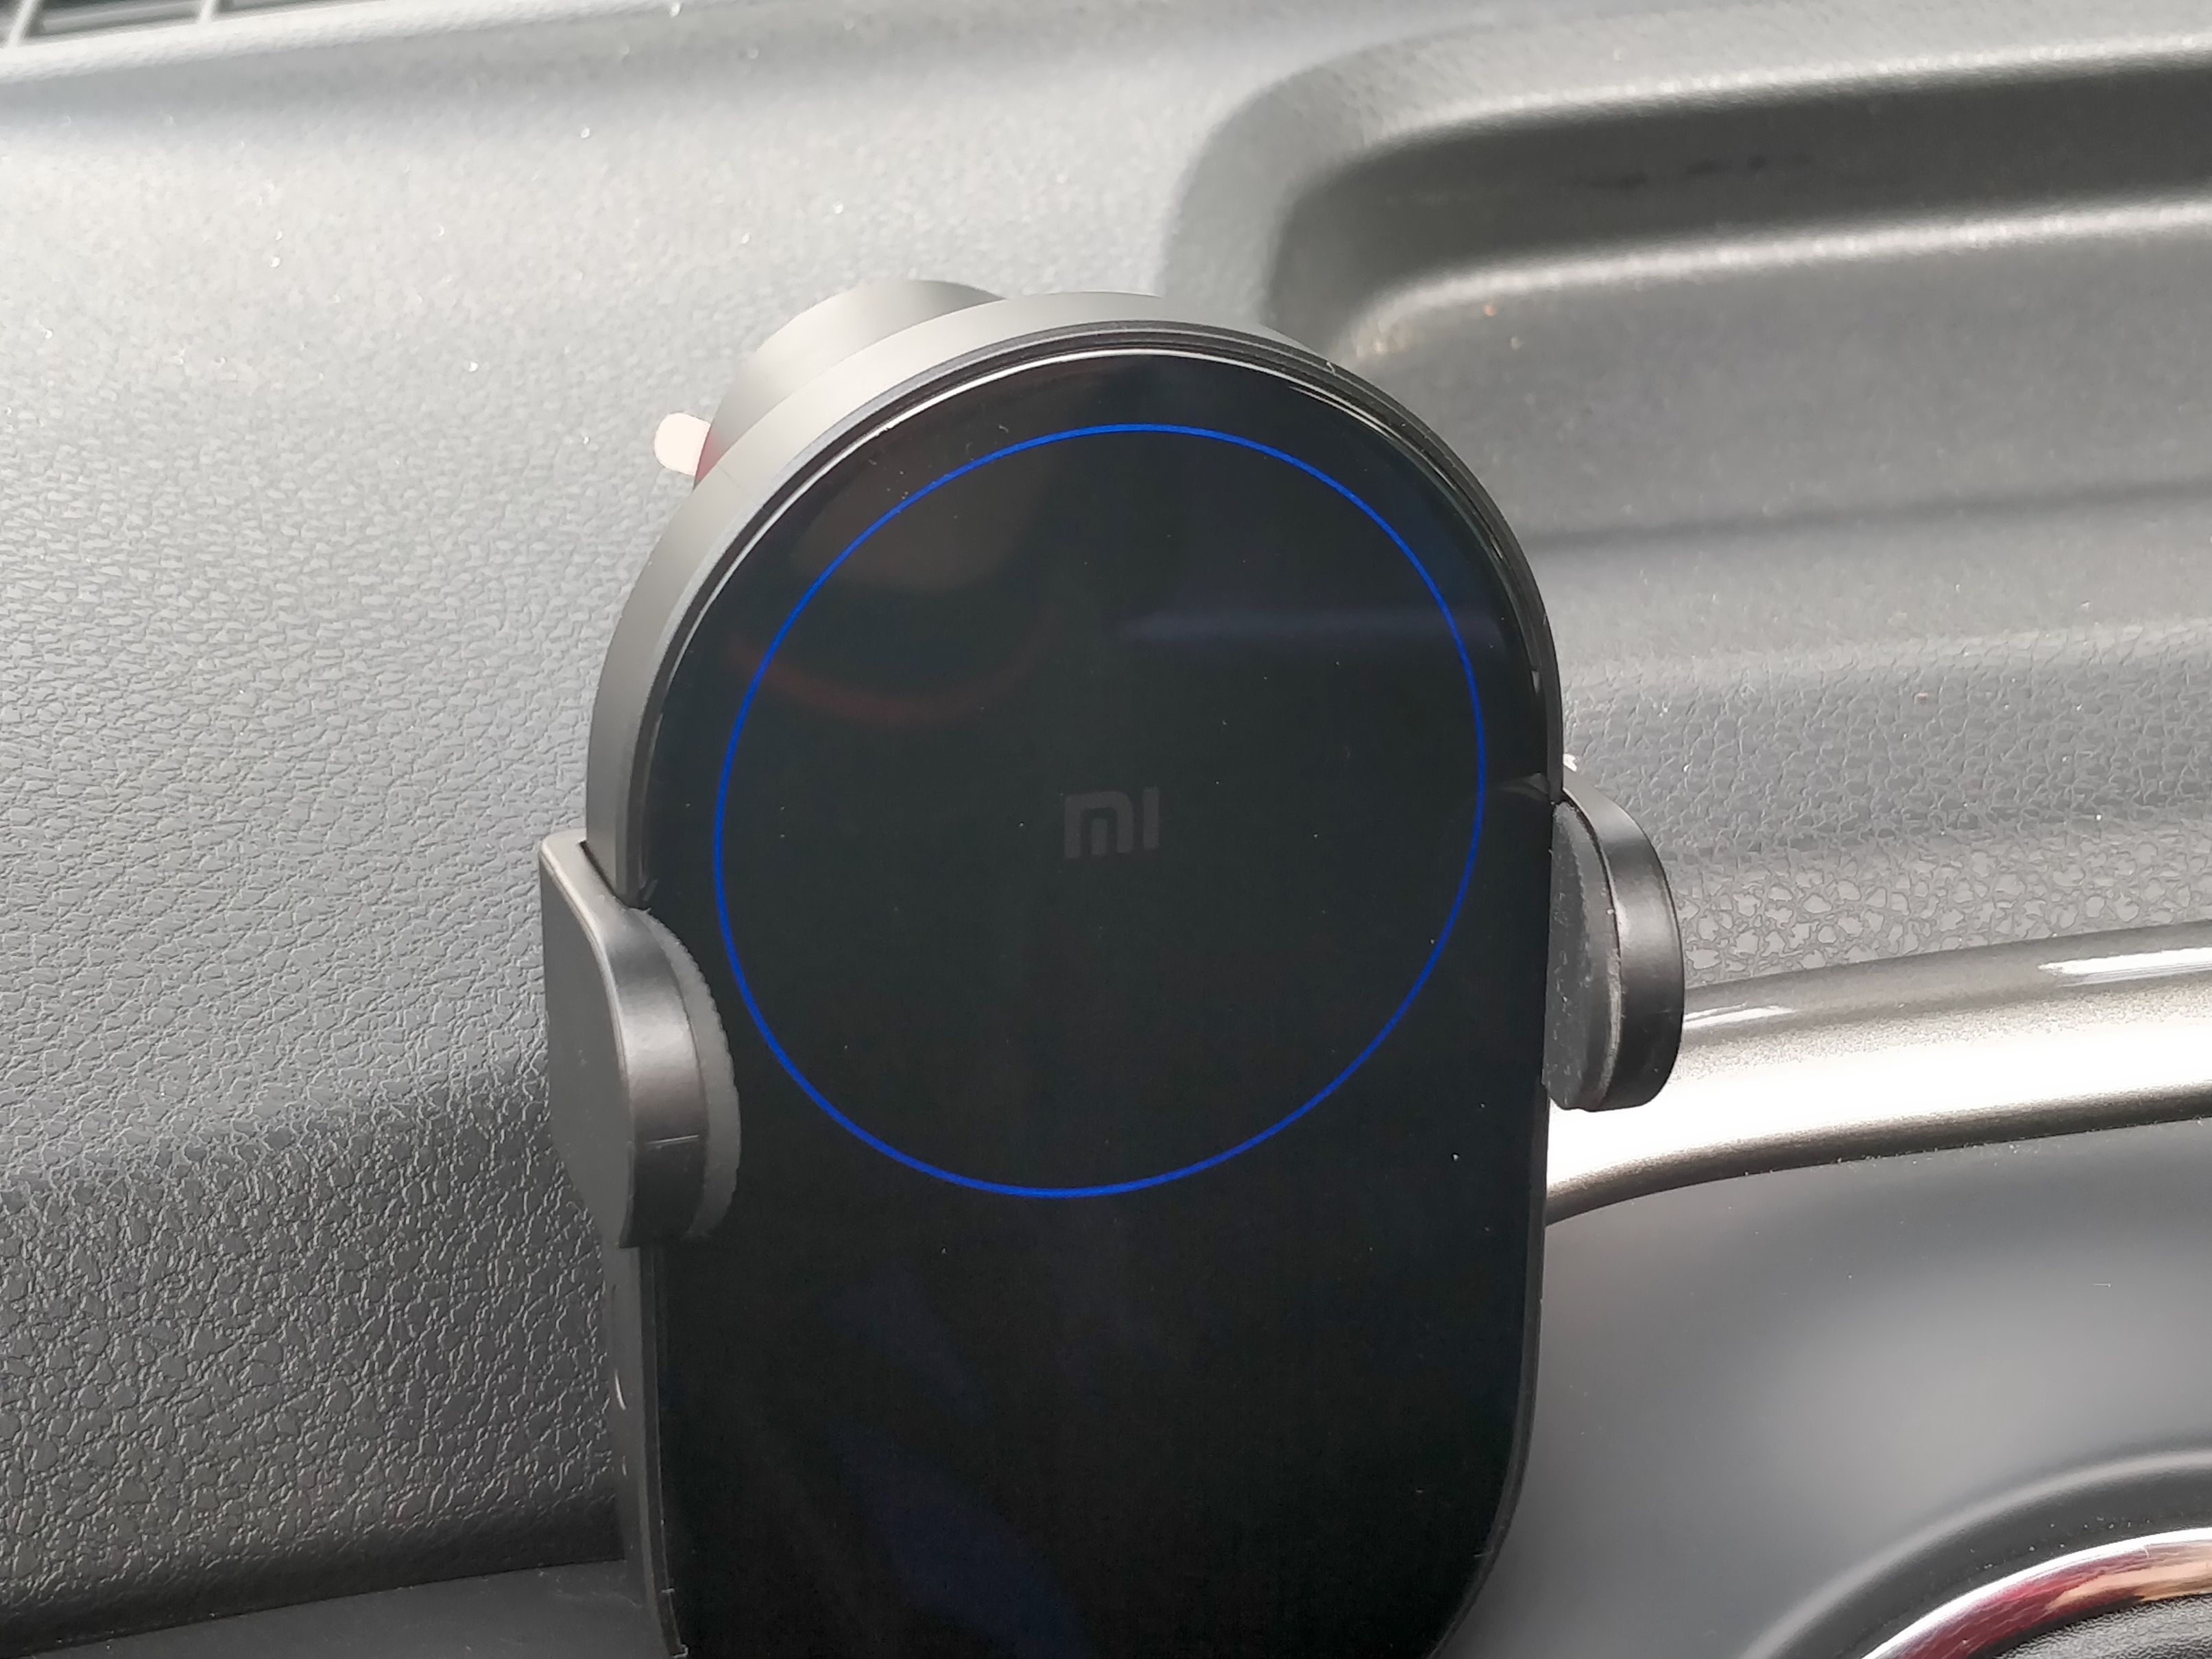 https://www.chinahandys.net/wp-content/uploads/2019/05/xiaomi-20w-wireless-car-charger/Xiaomi_wireless_charger_auto_pad.jpg